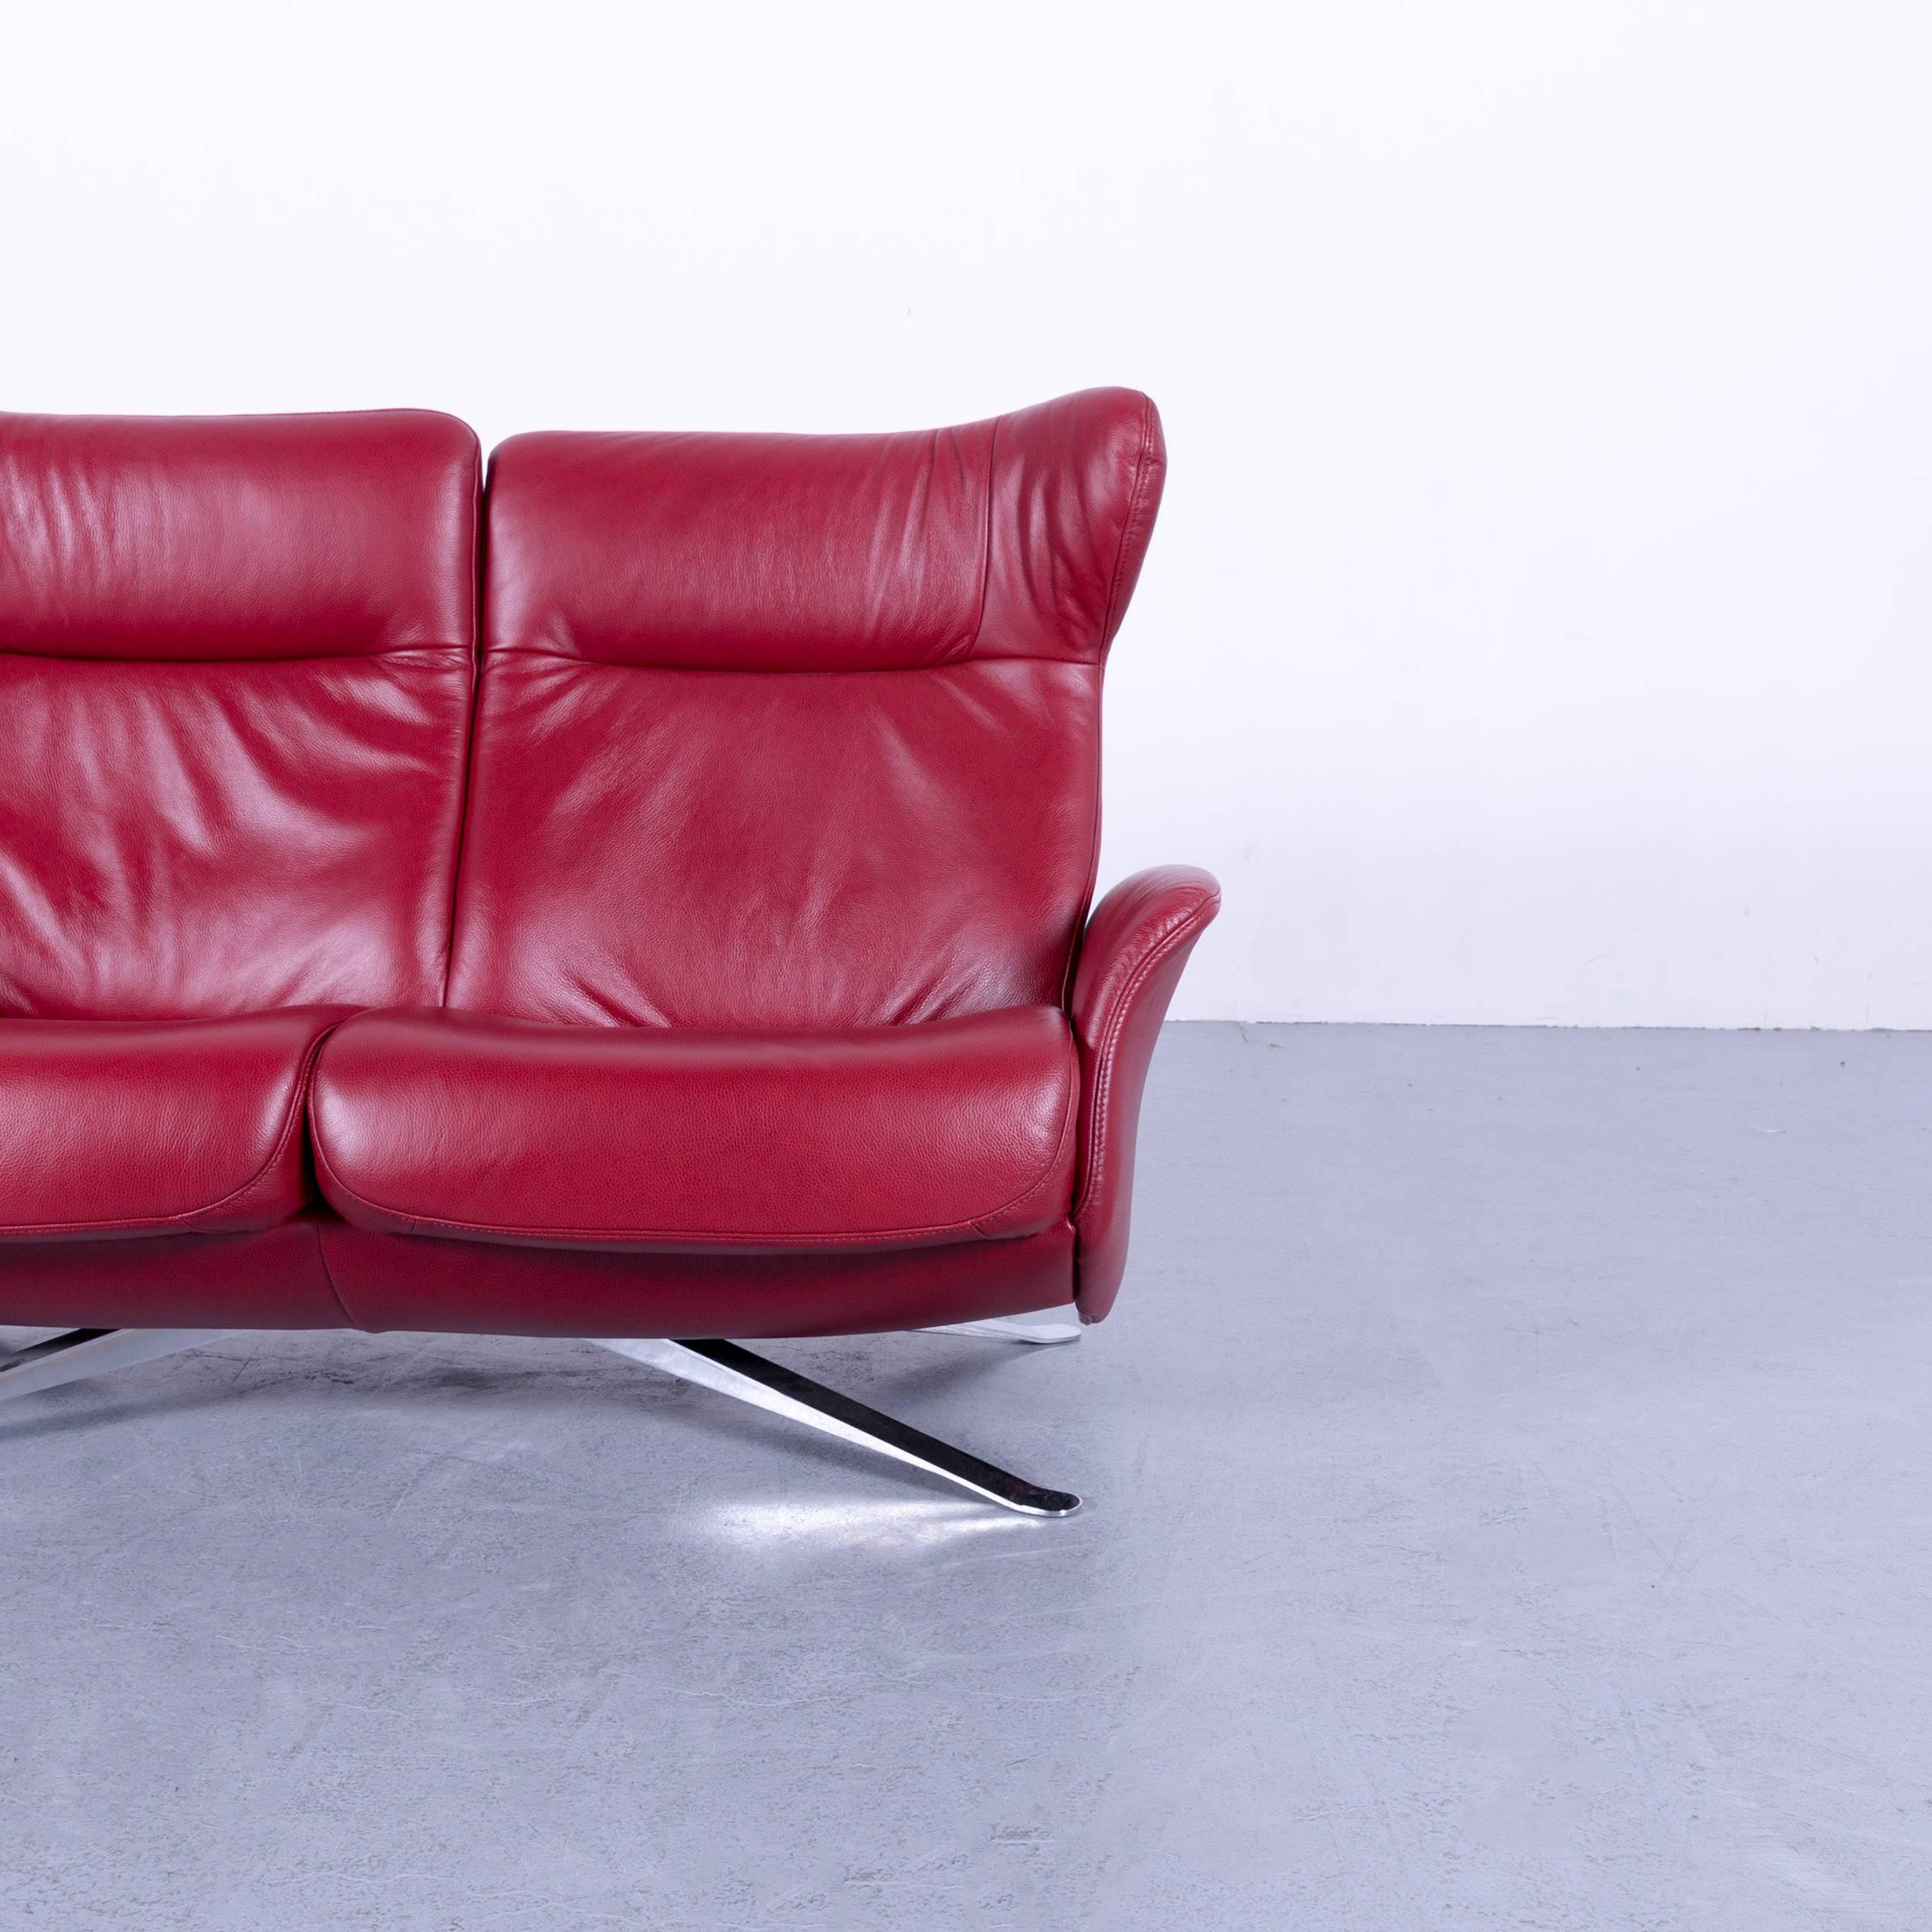 Contemporary Joop, Leather Sofa Red Two-Seat Recliner